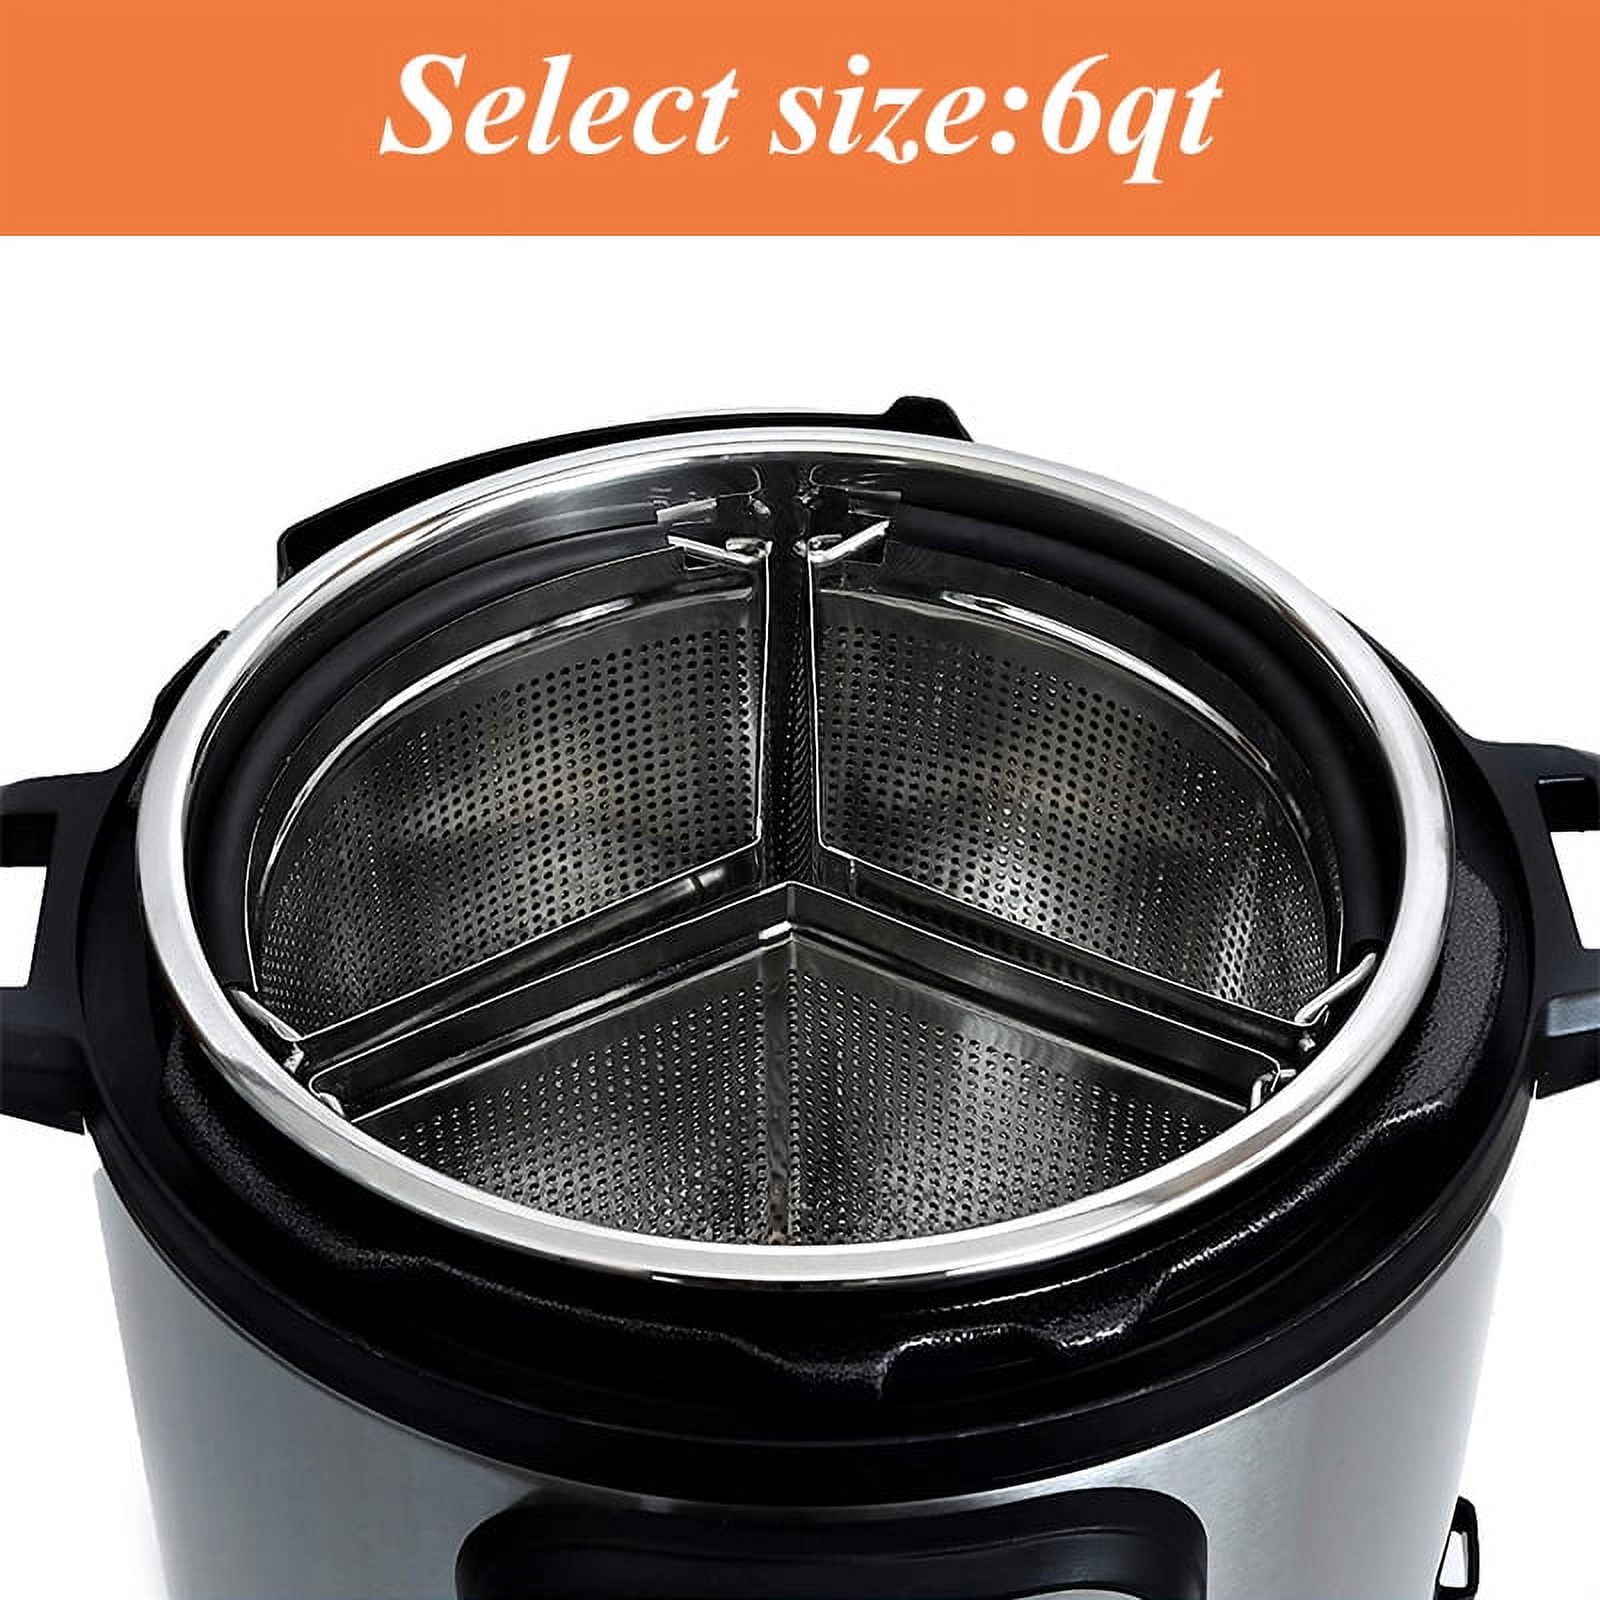 Source Stainless Steel Steamer Insert with silicone Handle and Non-Slip  Legs Steamer Basket Fits Pot Pressure Cooker on m.